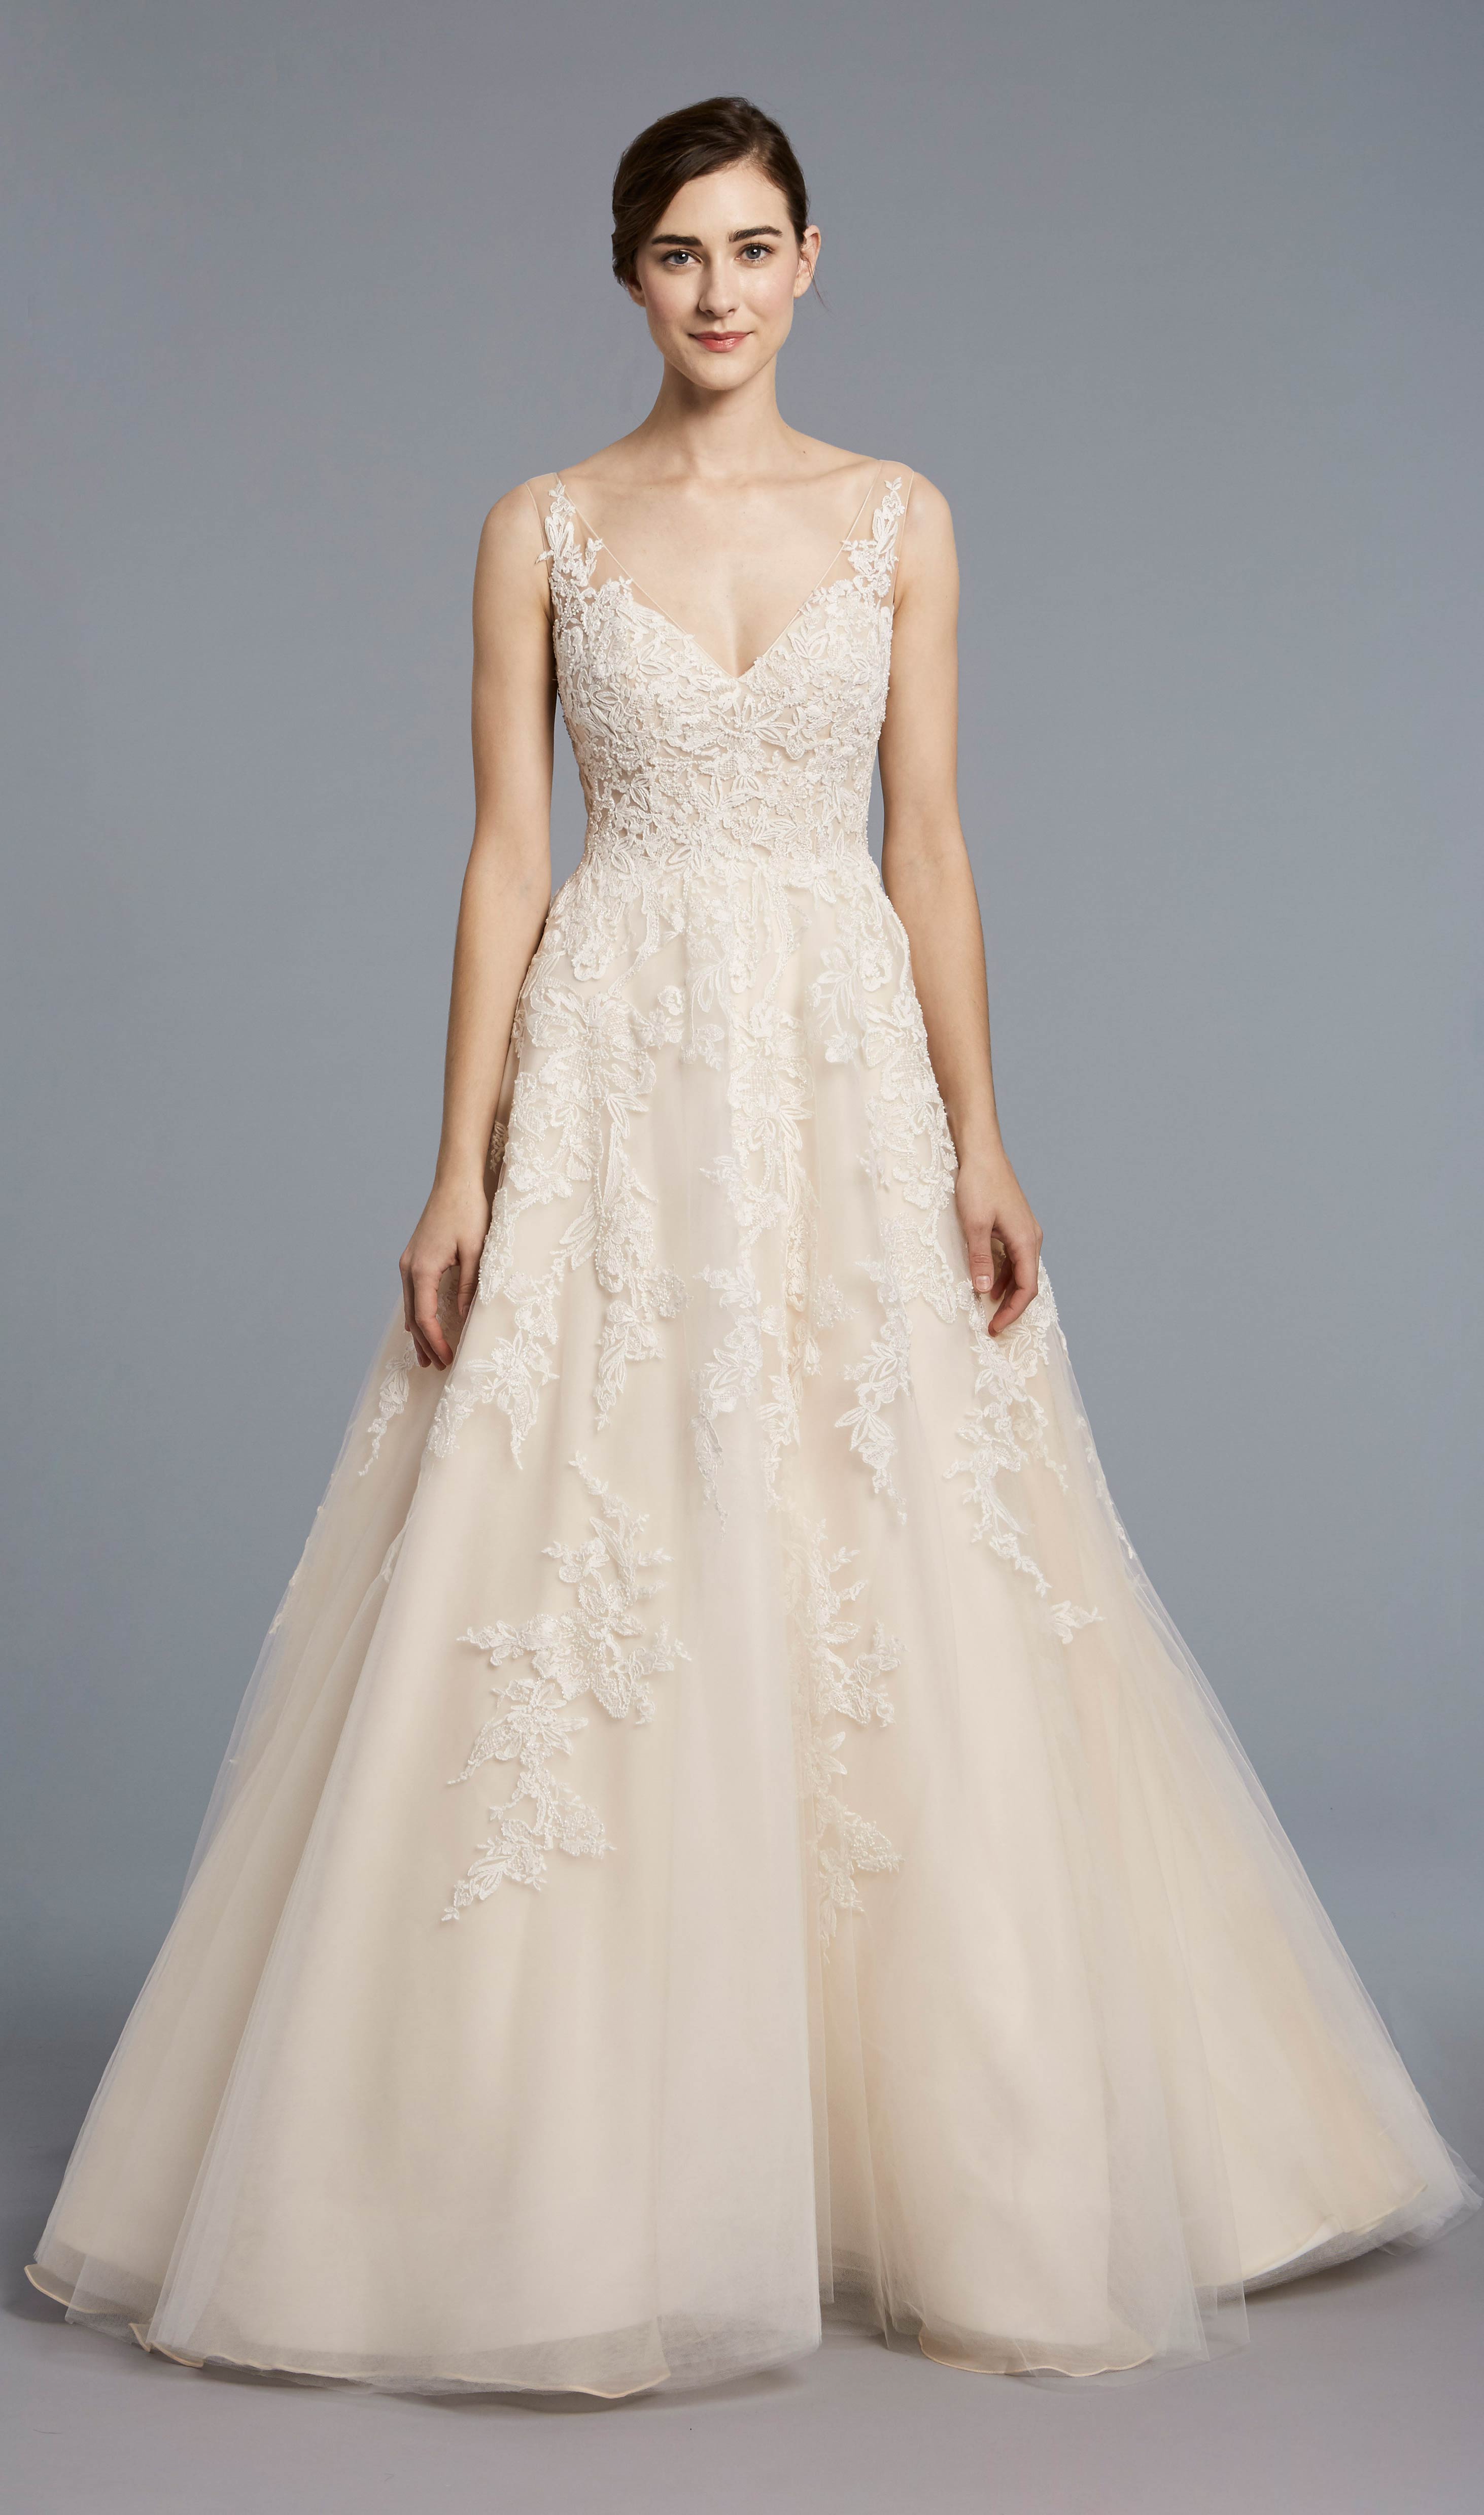 Camelo - Anne Barge 2018 wedding dress